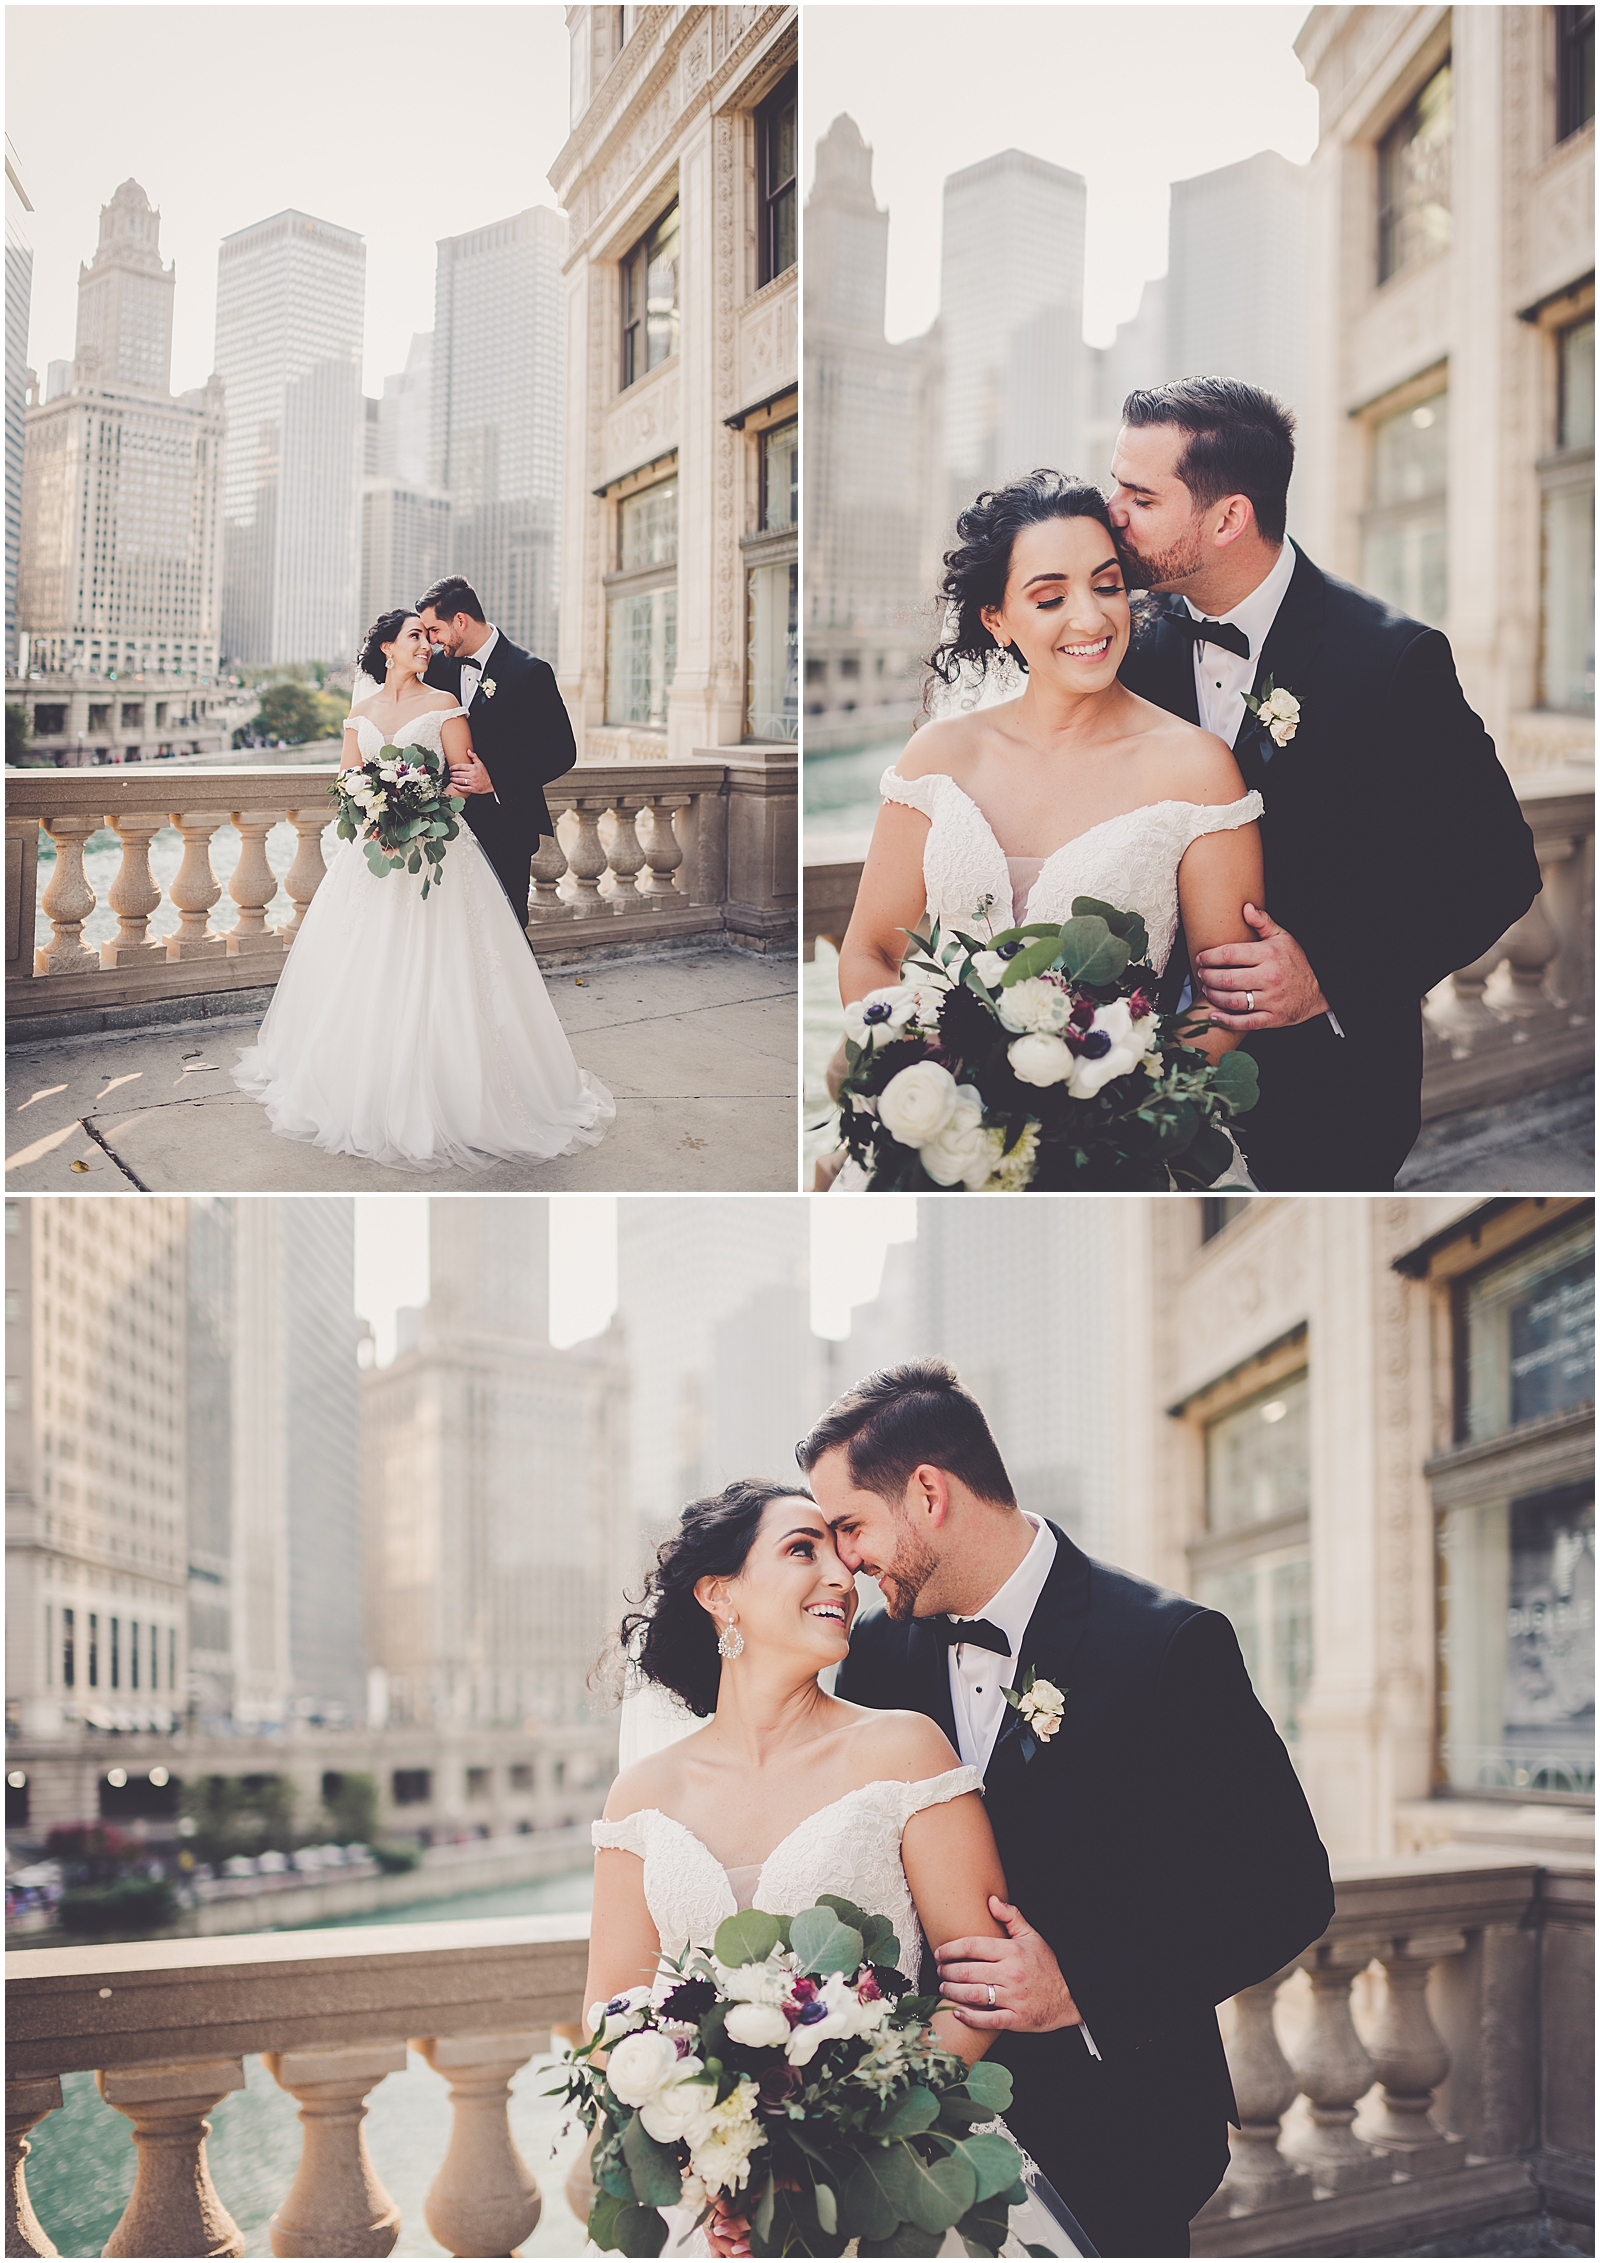 Julie and Paul's timeless & classic October wedding in Chicago, IL with Chicagoland wedding photographer Kara Evans Photographer.